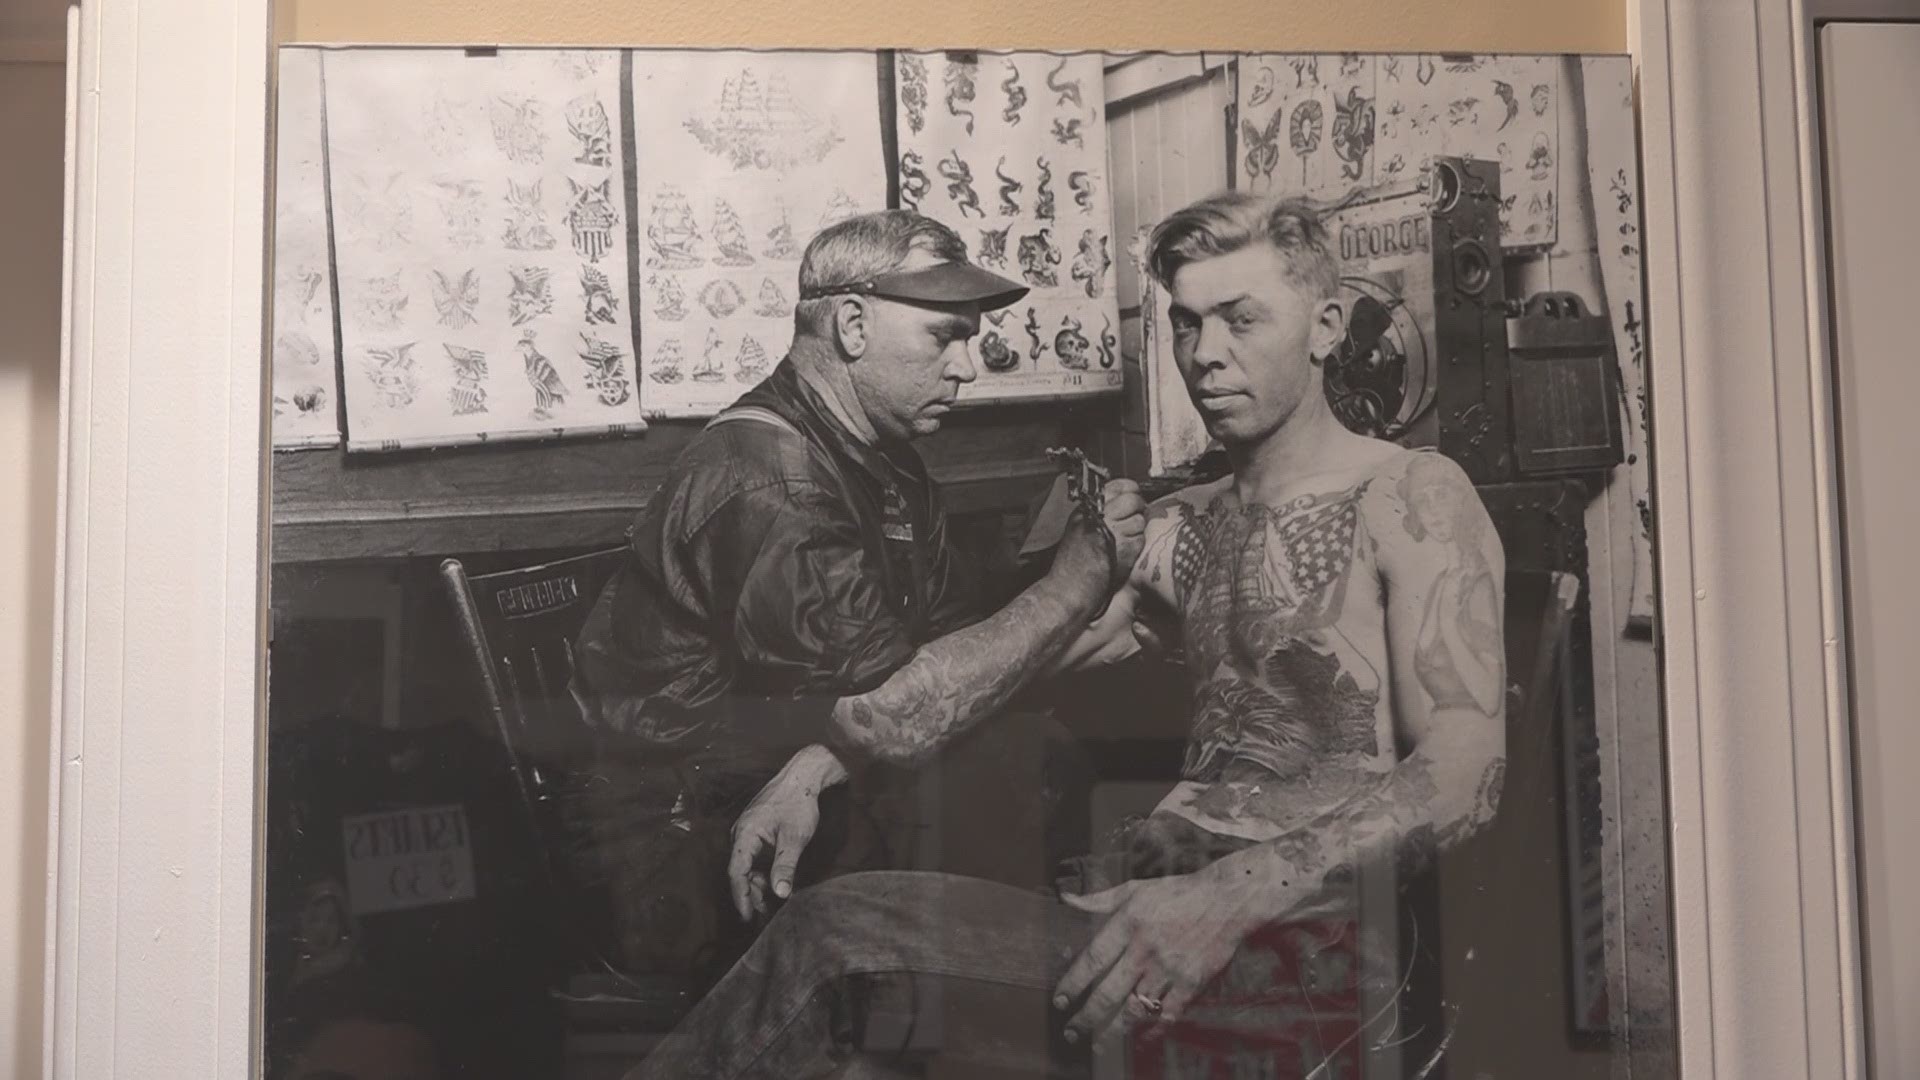 Tattoo Archive, a museum and research center established by Elkin-native C.W. Eldridge, gathers centuries of tattoo history and culture in a single building.